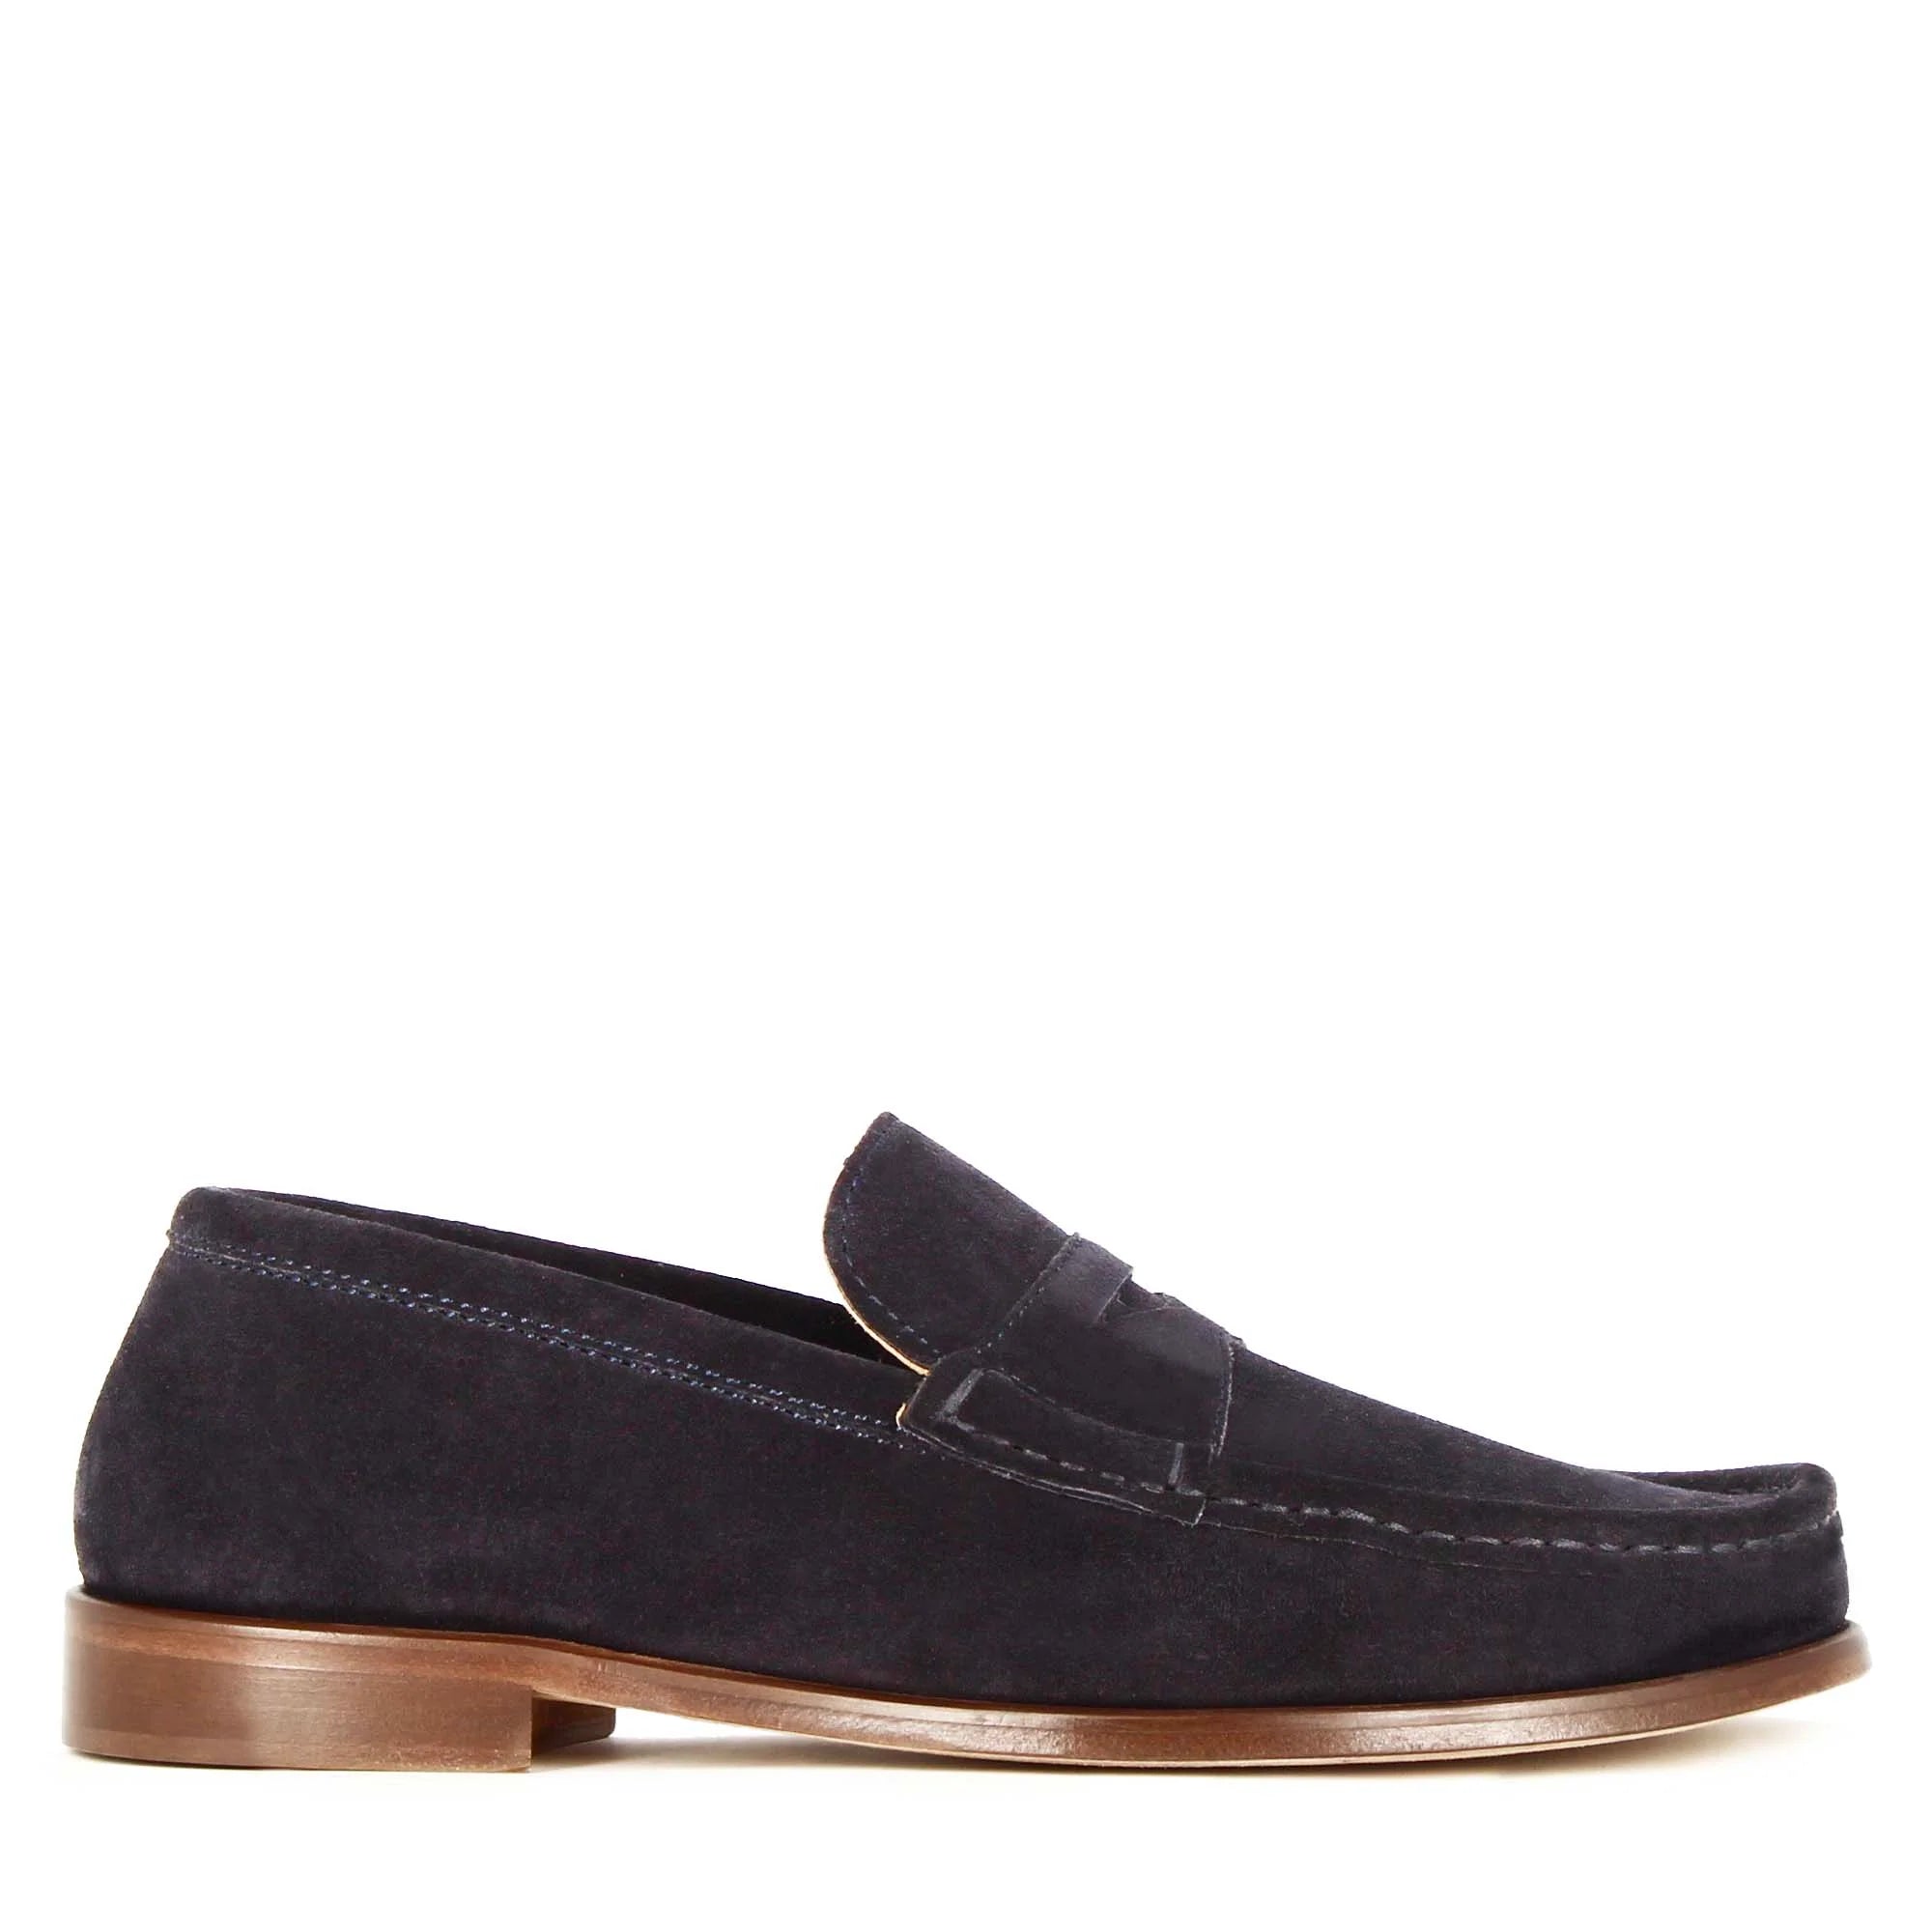 Navy suede leather loafer